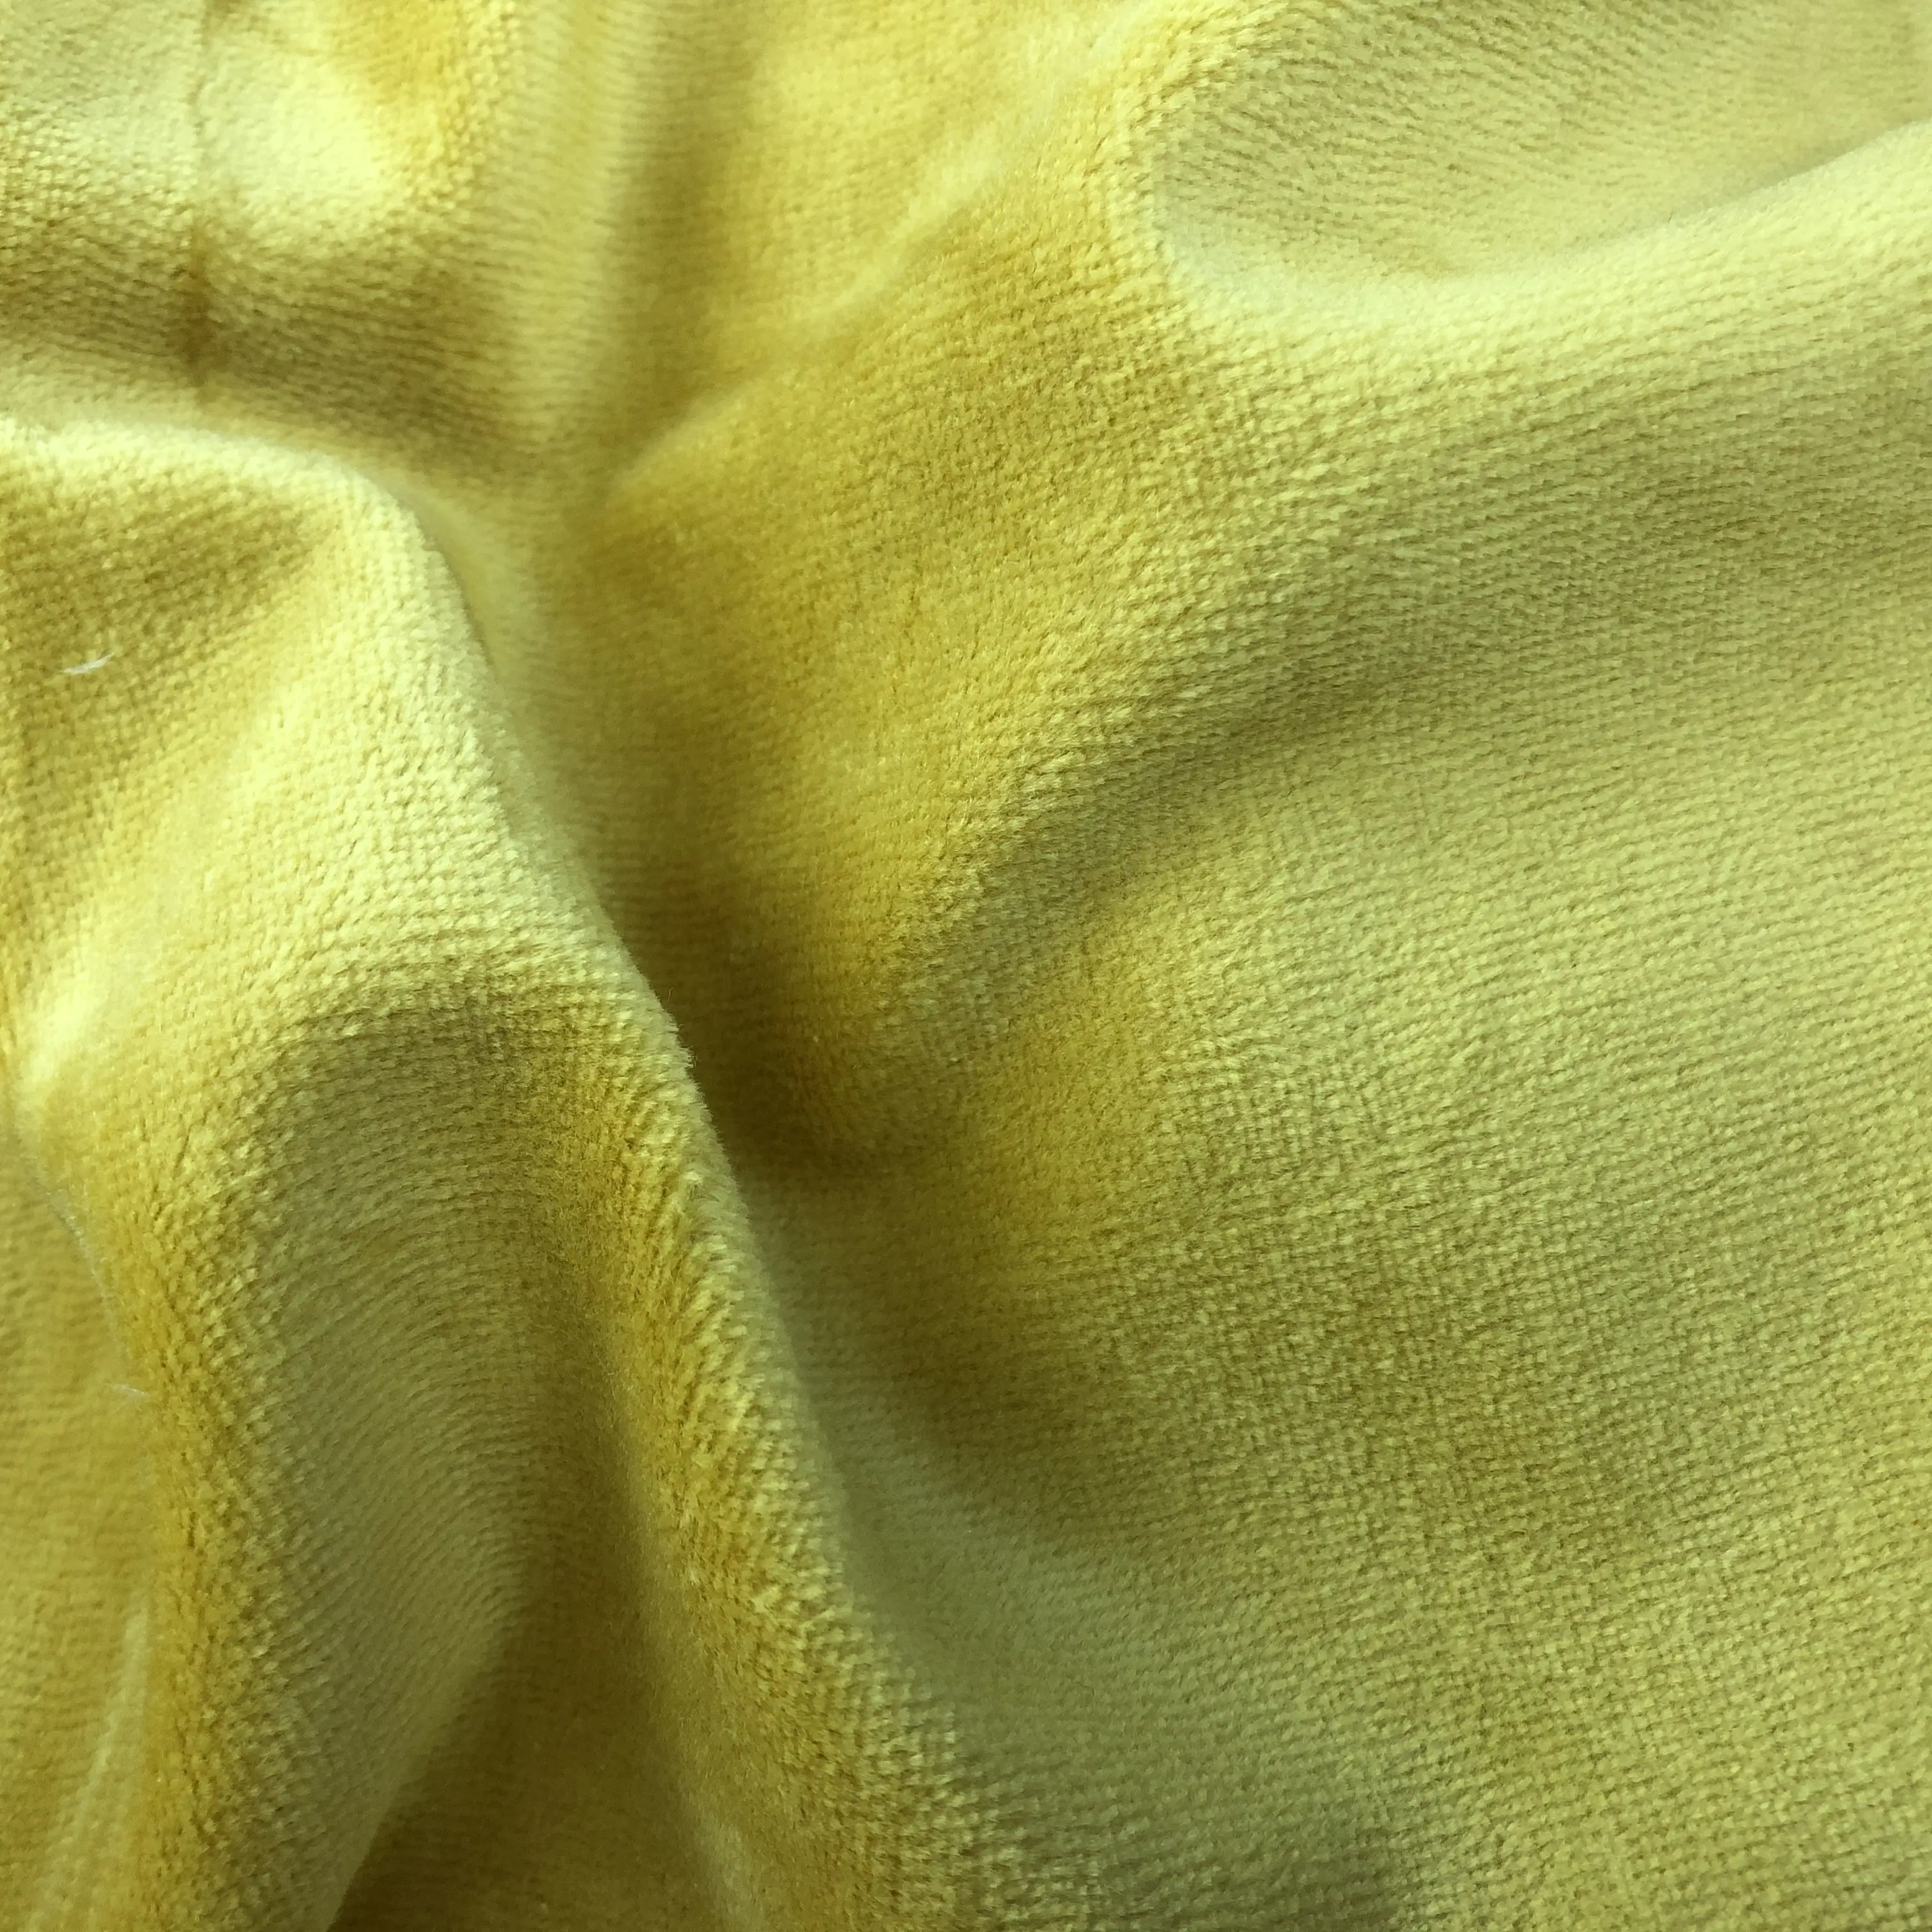 Good quality and cheap price Cotton velvet fabric for Warm winter clothing fabrics customize plain dyed color